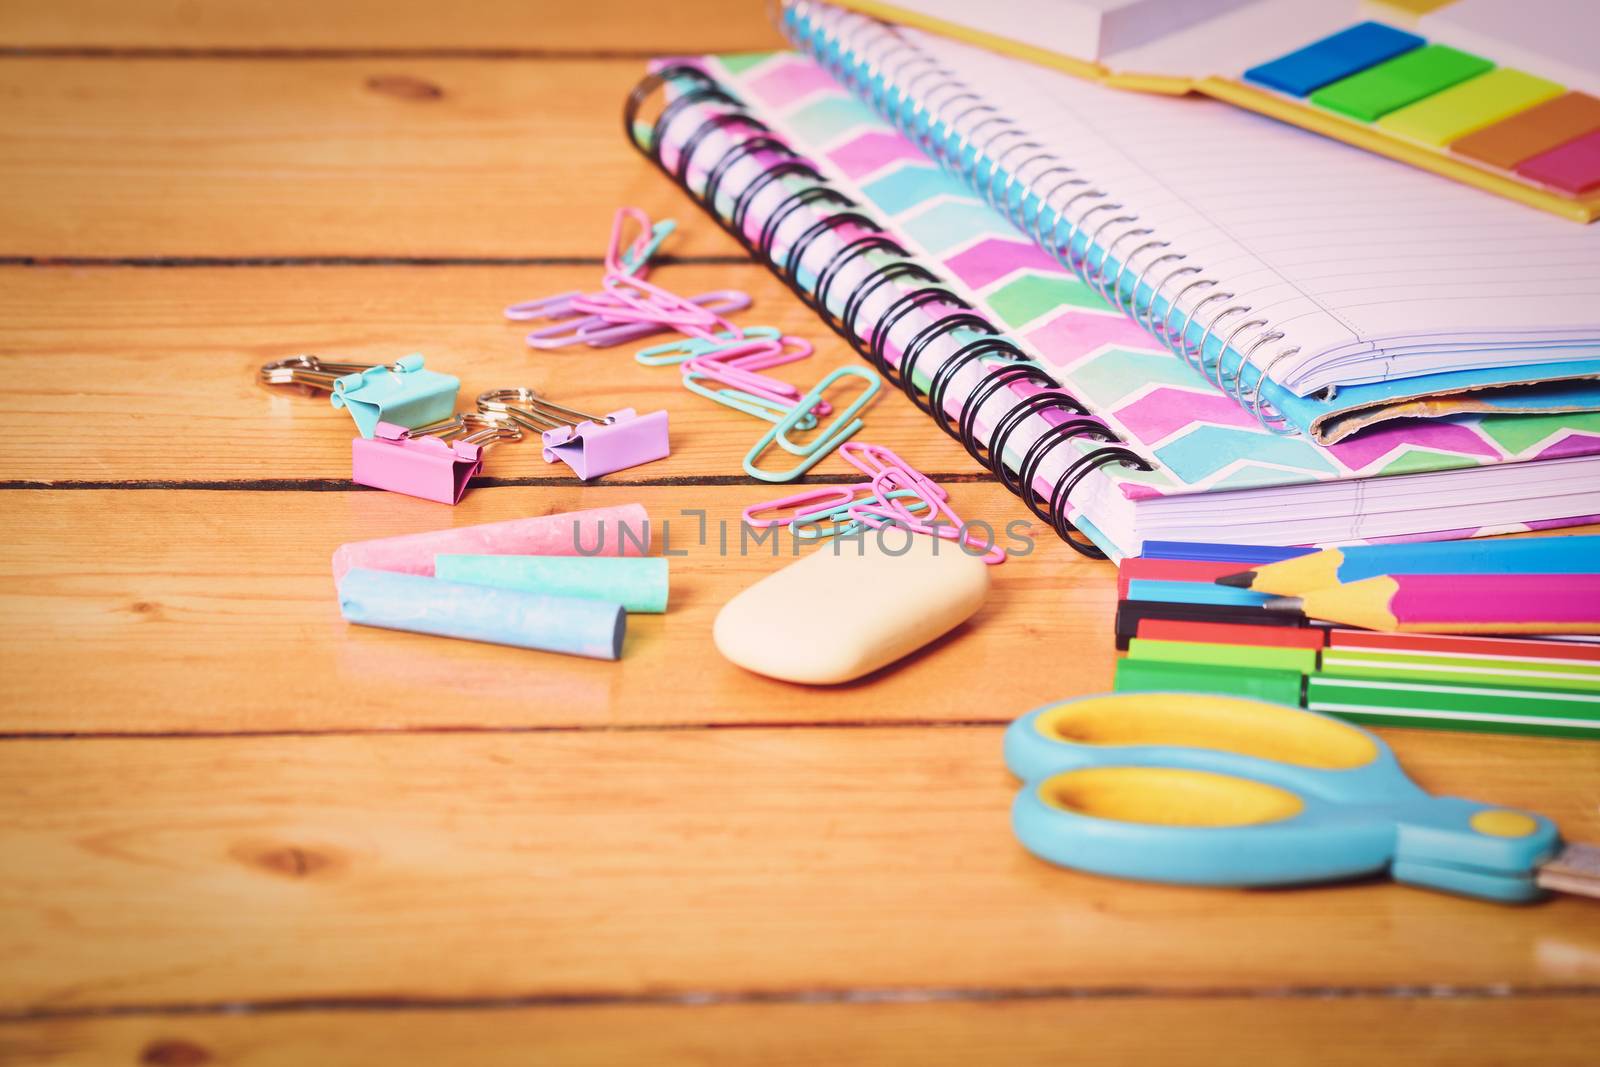 Cute girly school stationary on wooden background by Mendelex